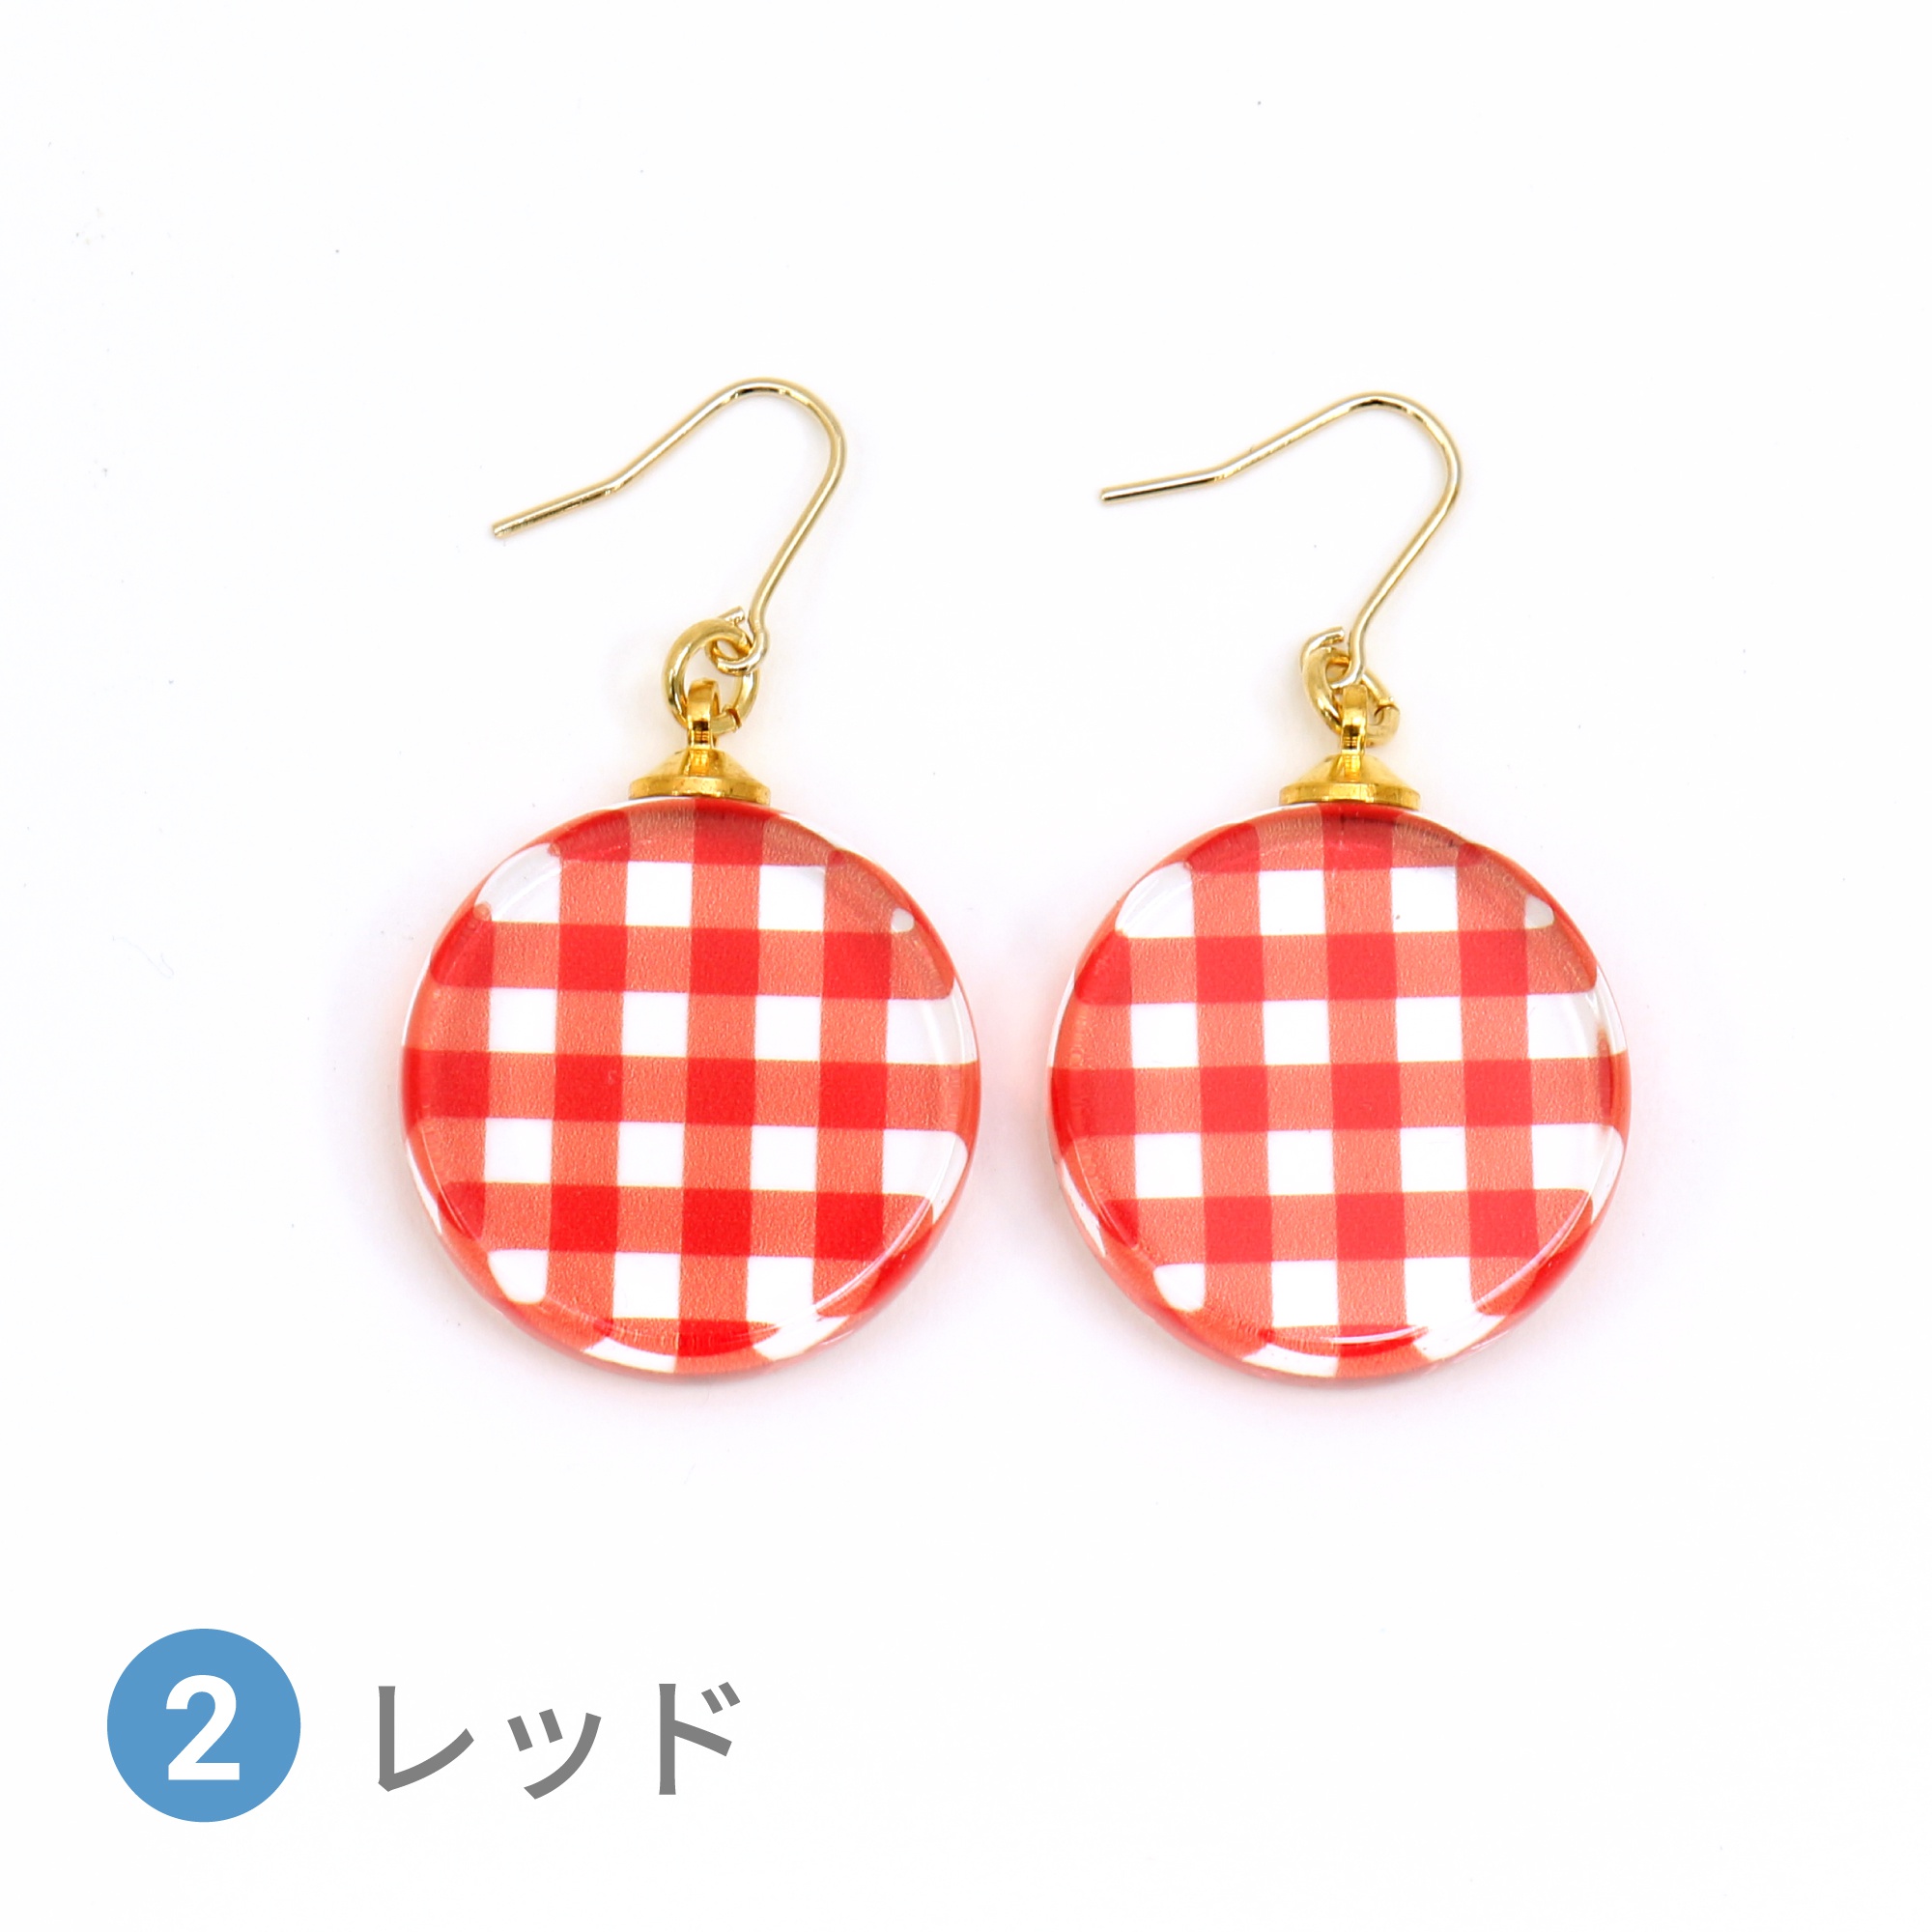 Glass accessories Pierced Earring GINGHAM CHECK red round shape